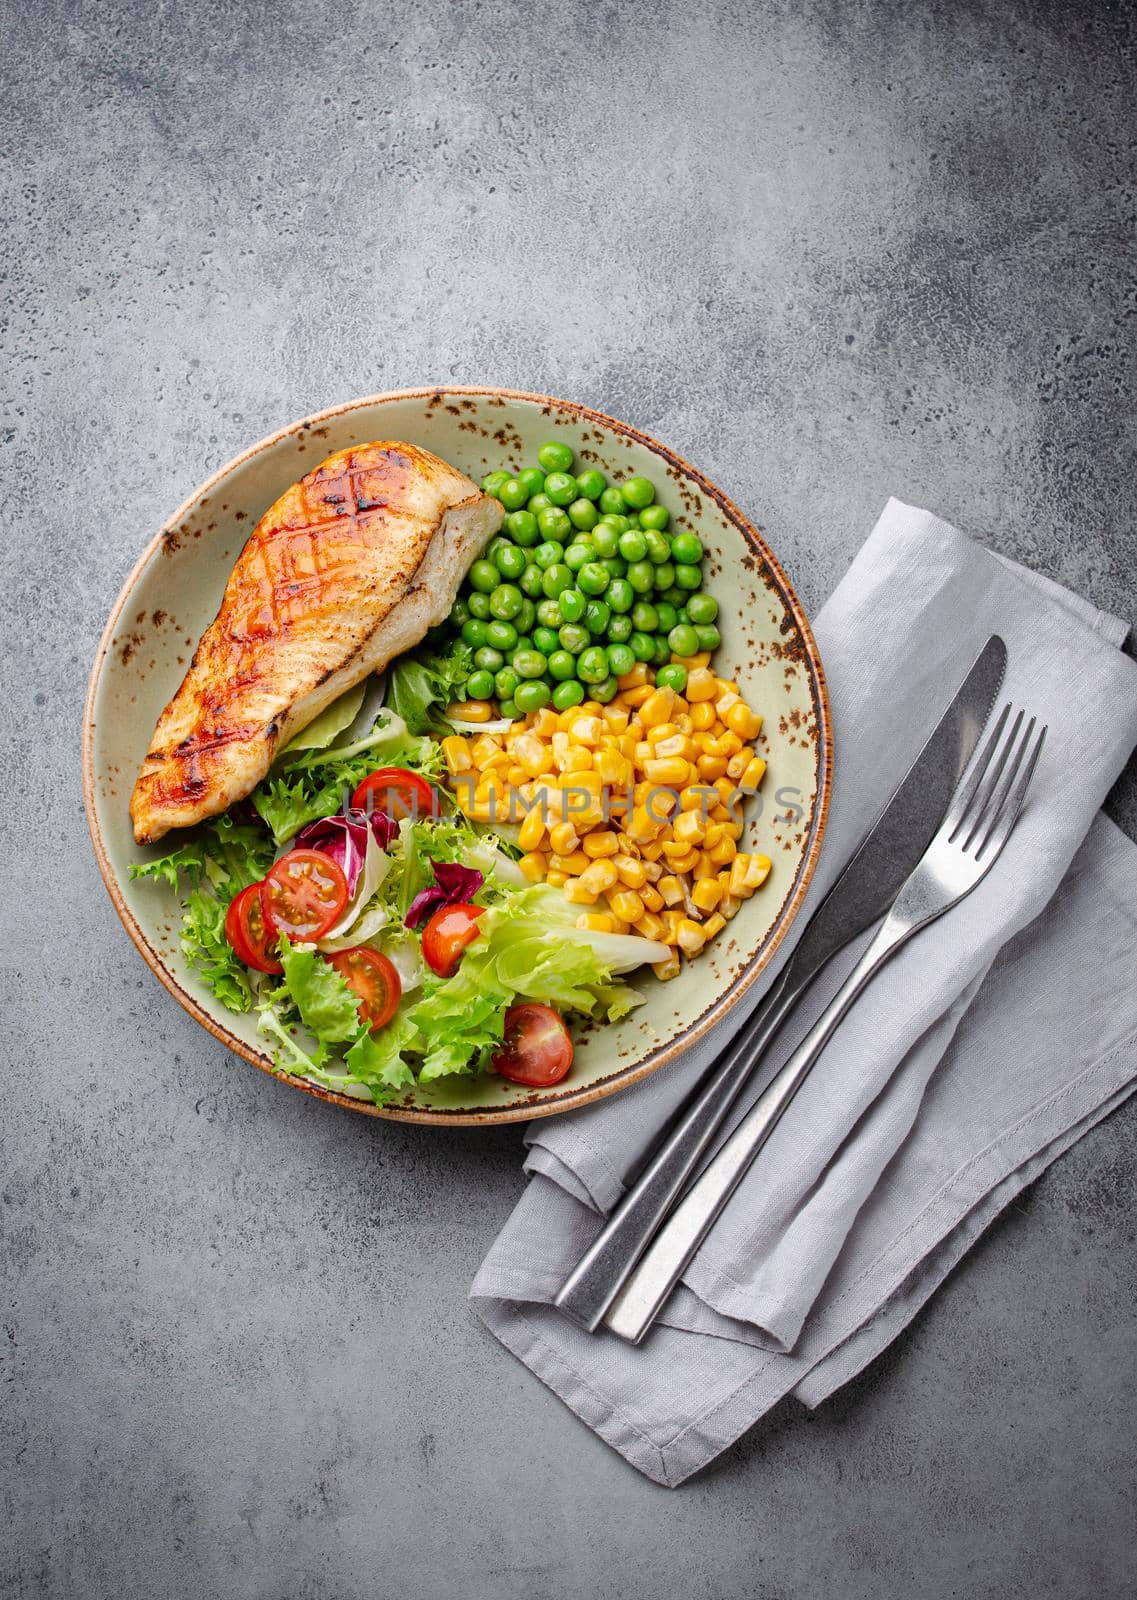 Baked chicken breast on plate with fresh salad, green peas and corn, grey stone background, top view. Healthy fitness meal with chicken fillet, balanced in proteins and carbs. Dieting and nutrition